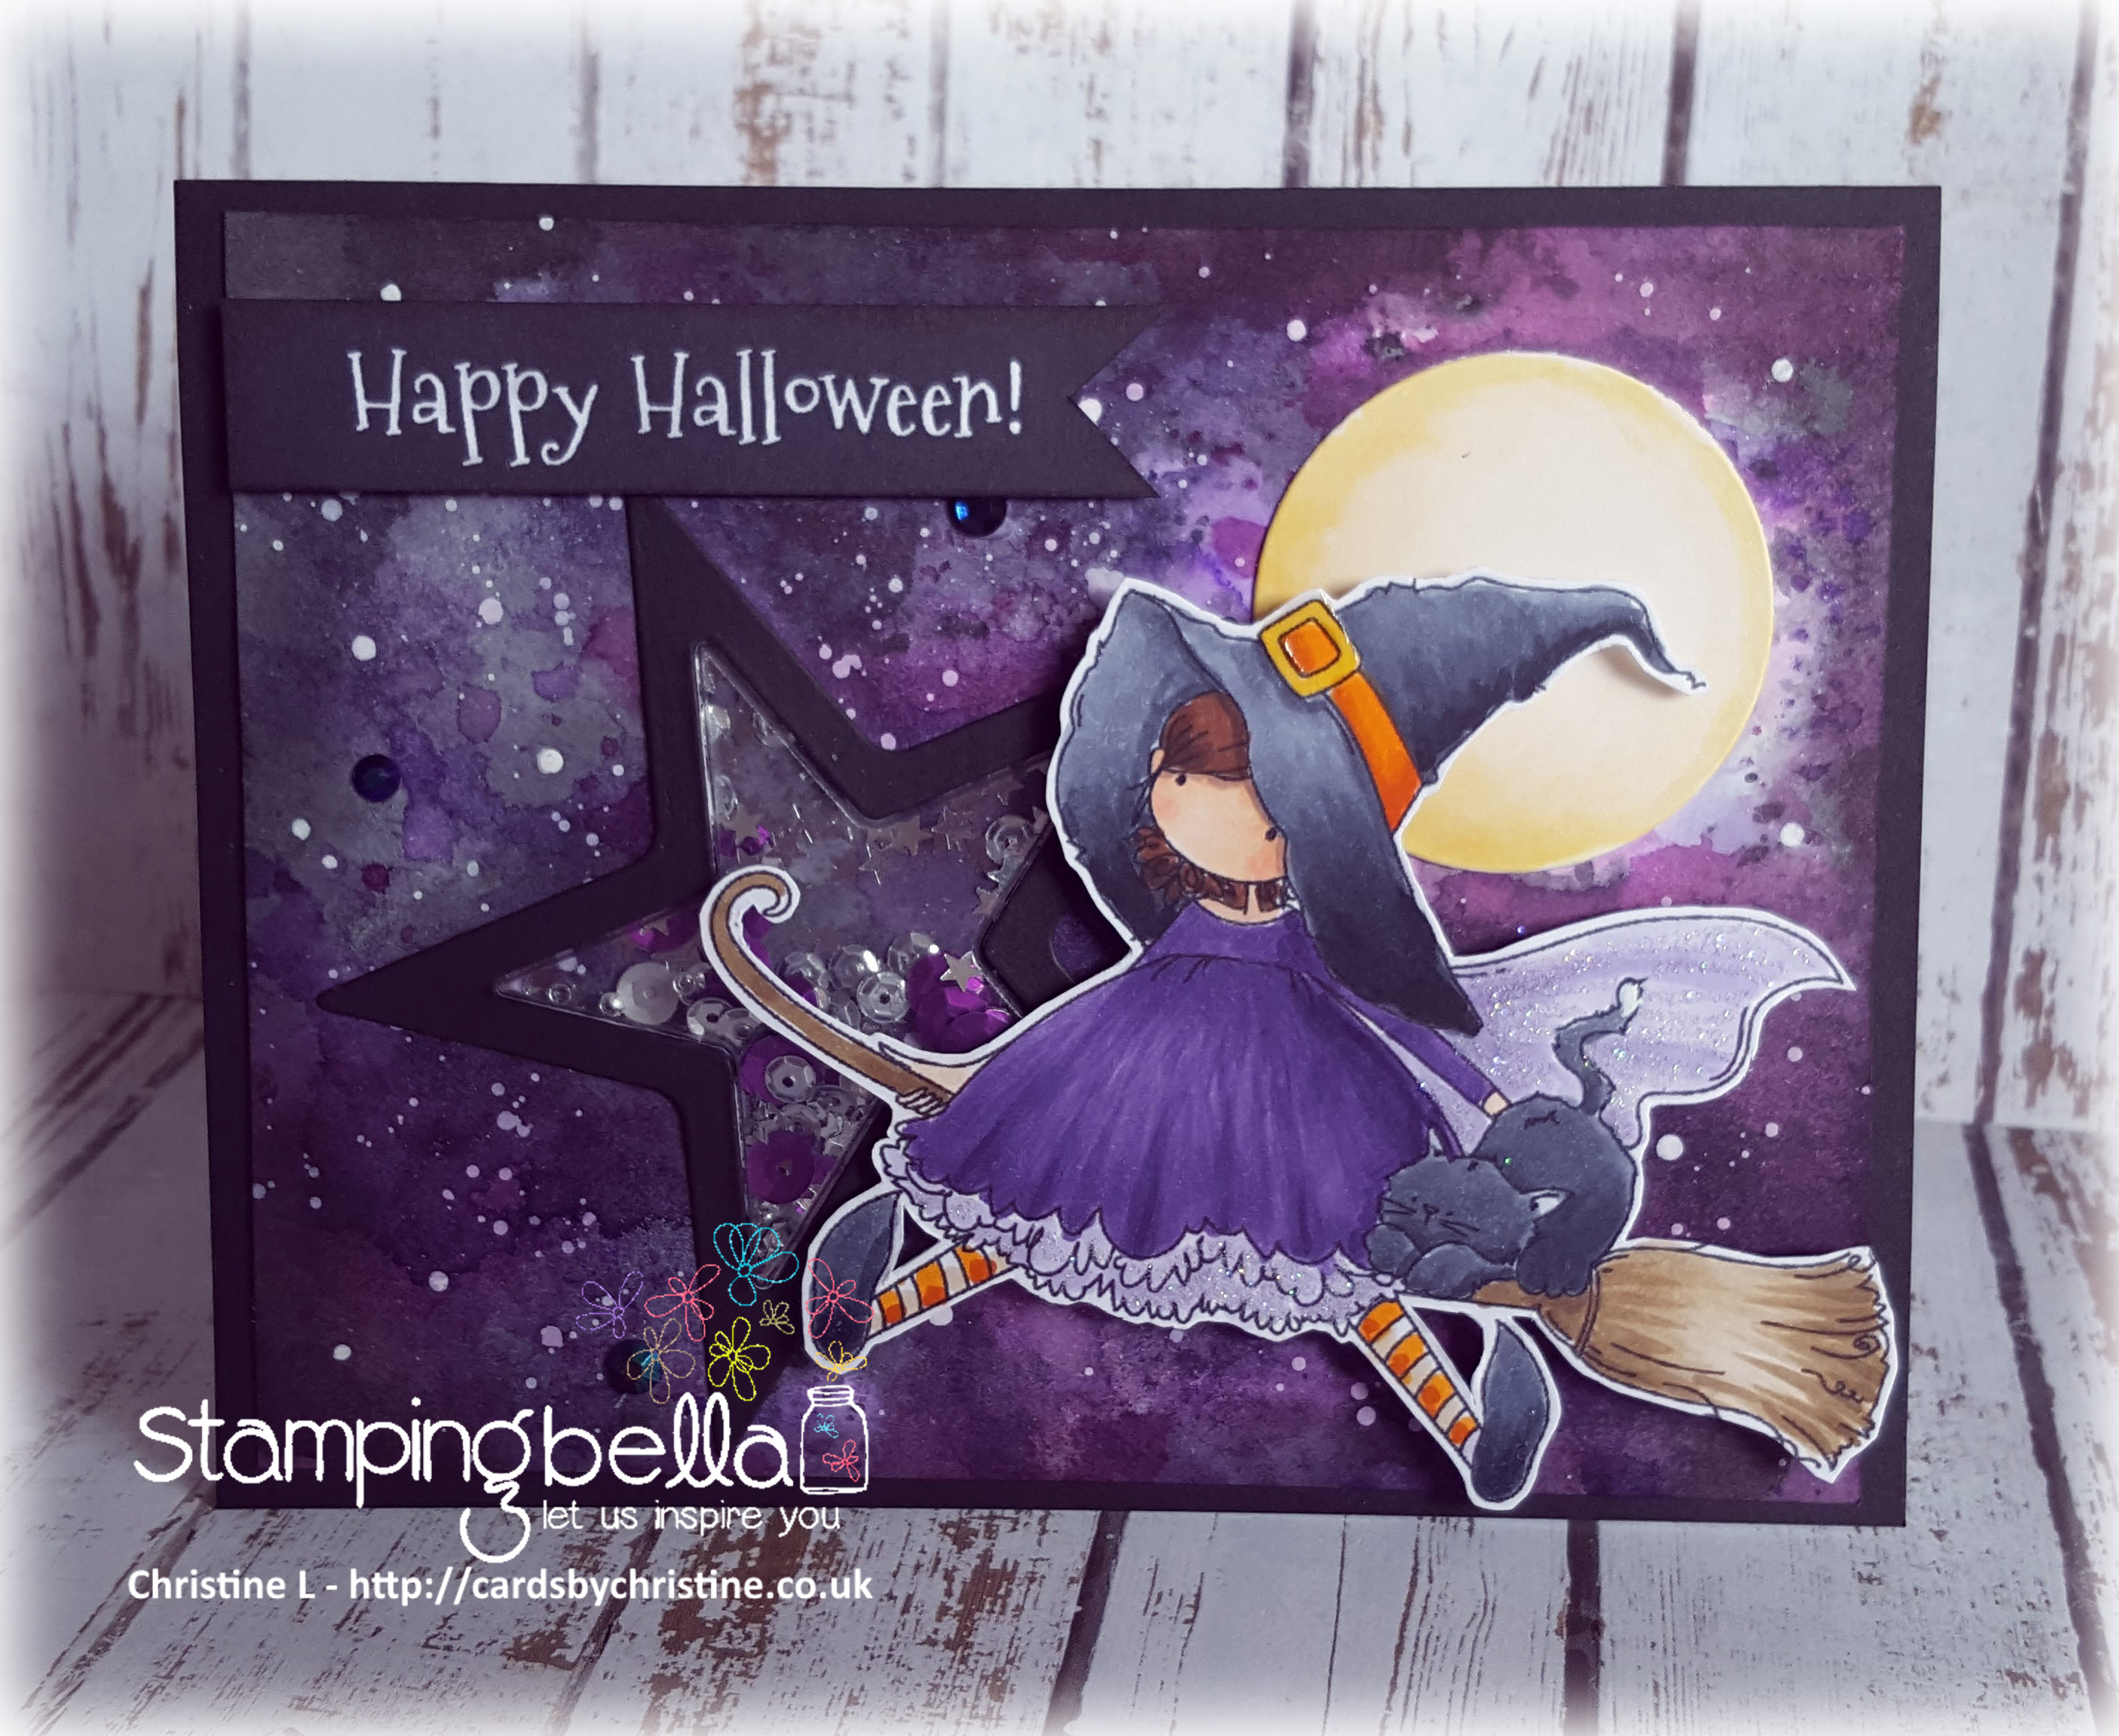 Stamping Bella SNEAK PEEK DAY 1- STAMPS USED: Tiny Townie HATTIE loves HALLOWEEN card by CHRISTINE LEVISON